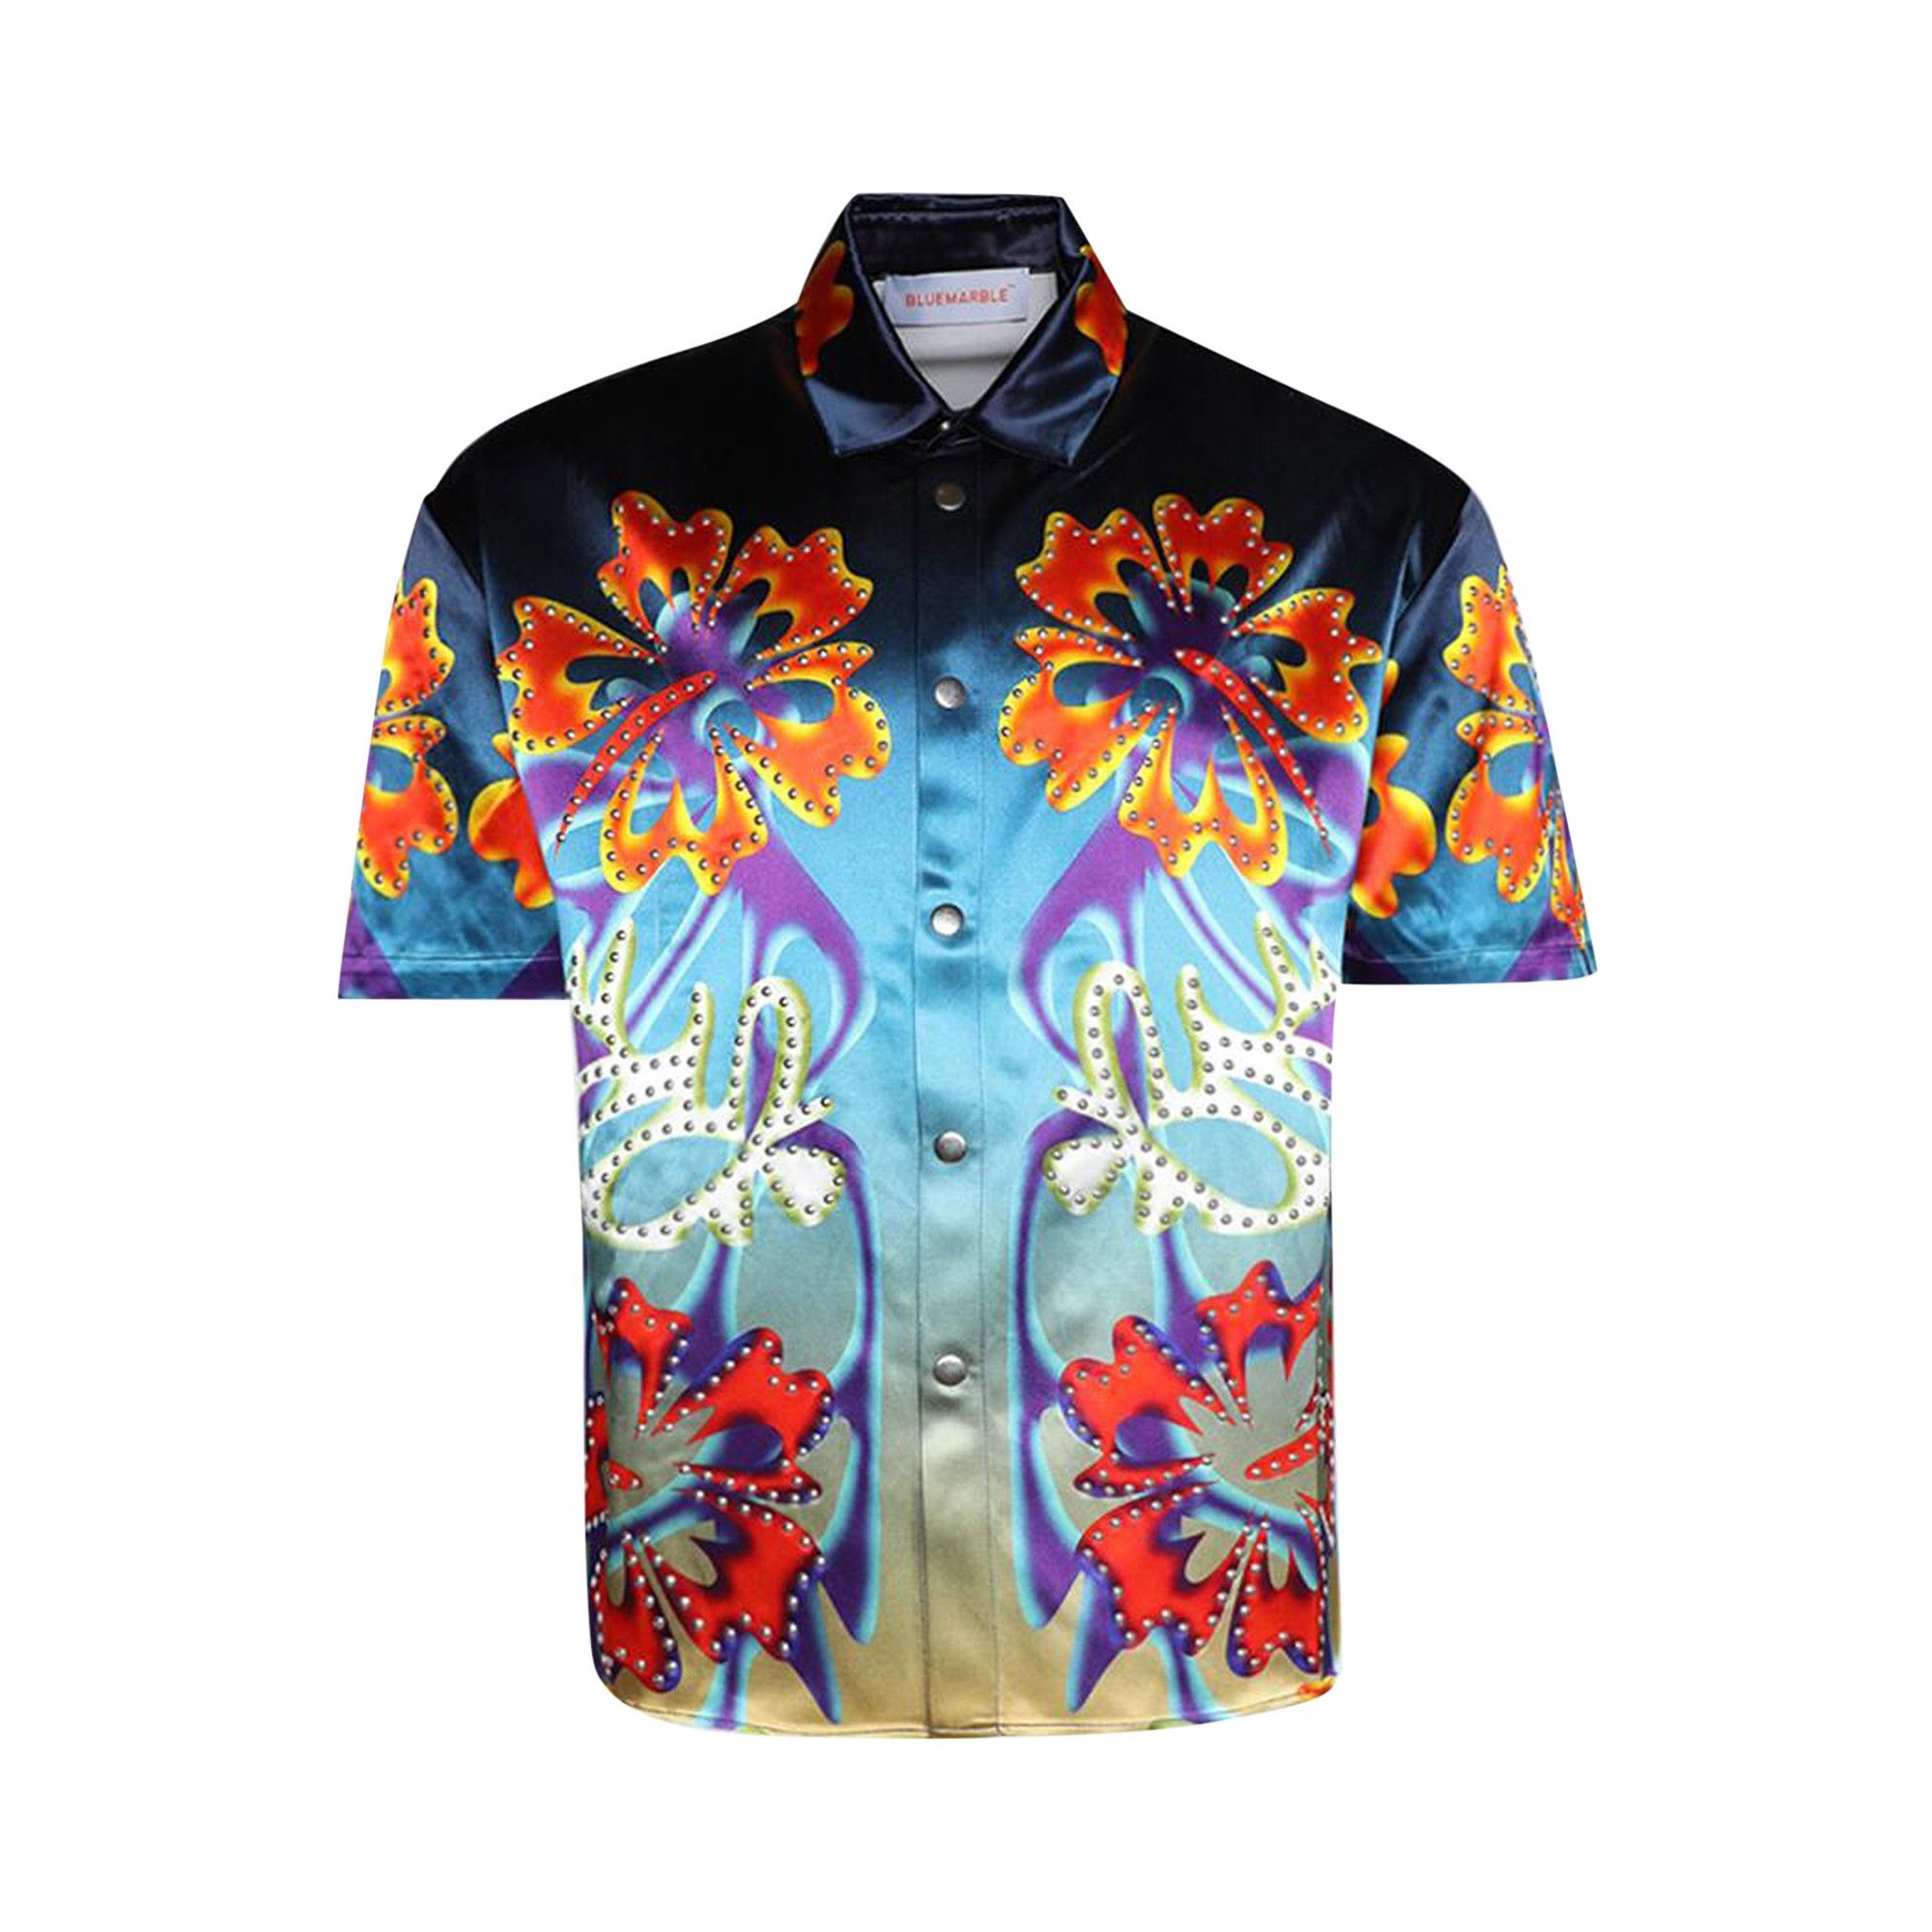 BLUEMARBLE Studded Hibiscus Short-Sleeve Shirt 'Primul' - 1